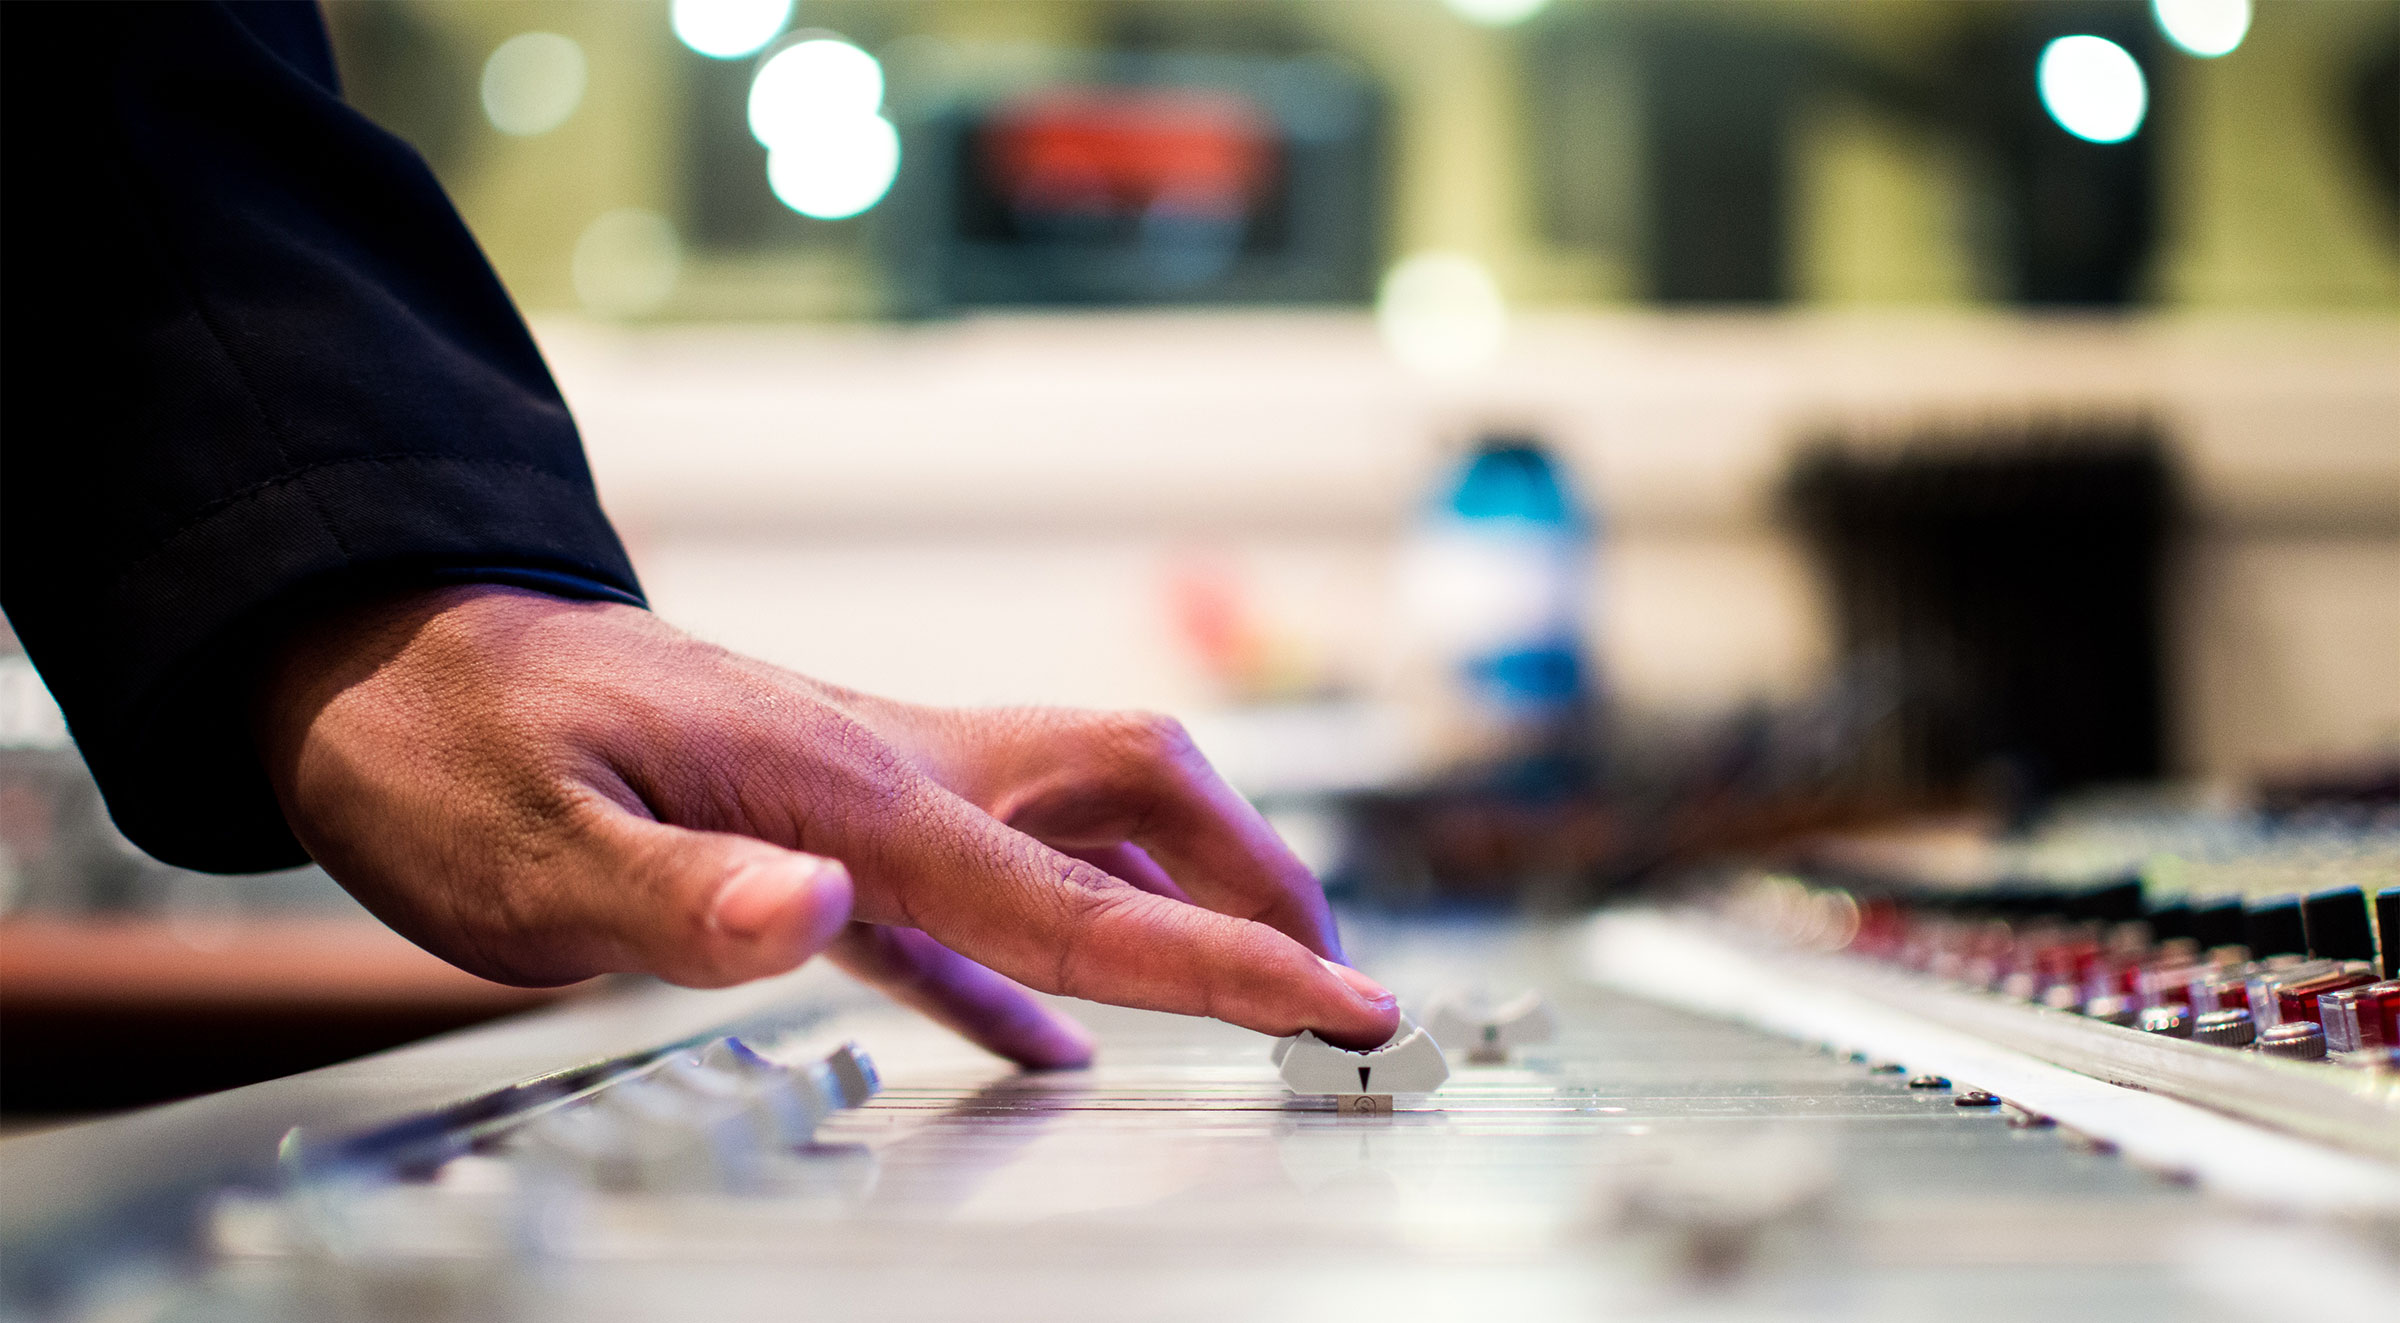 A photo of a person at a mixing desk using their finger to slide one of the controls